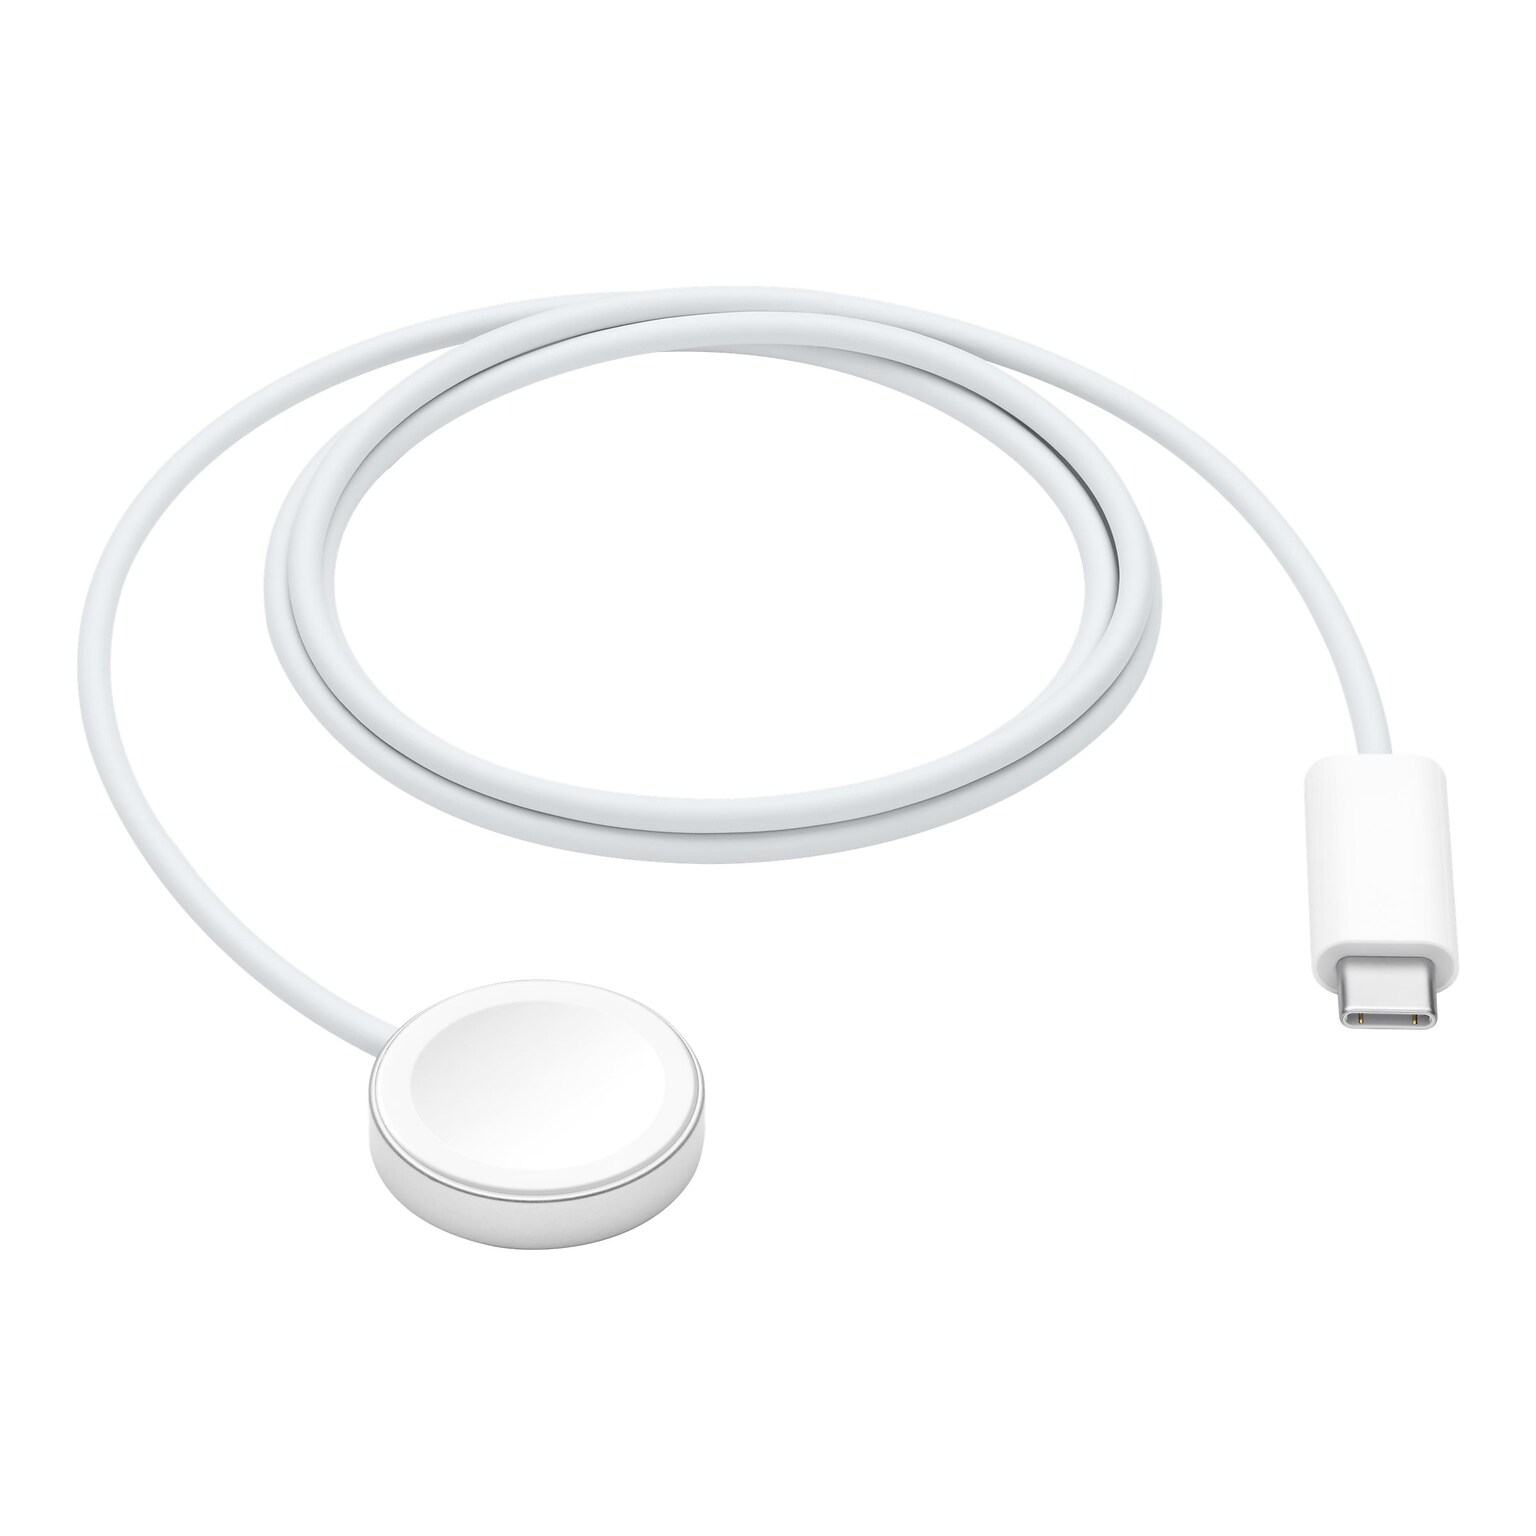 Apple 3.3 Charging Cable for Apple Watch, White (MLWJ3AM/A)